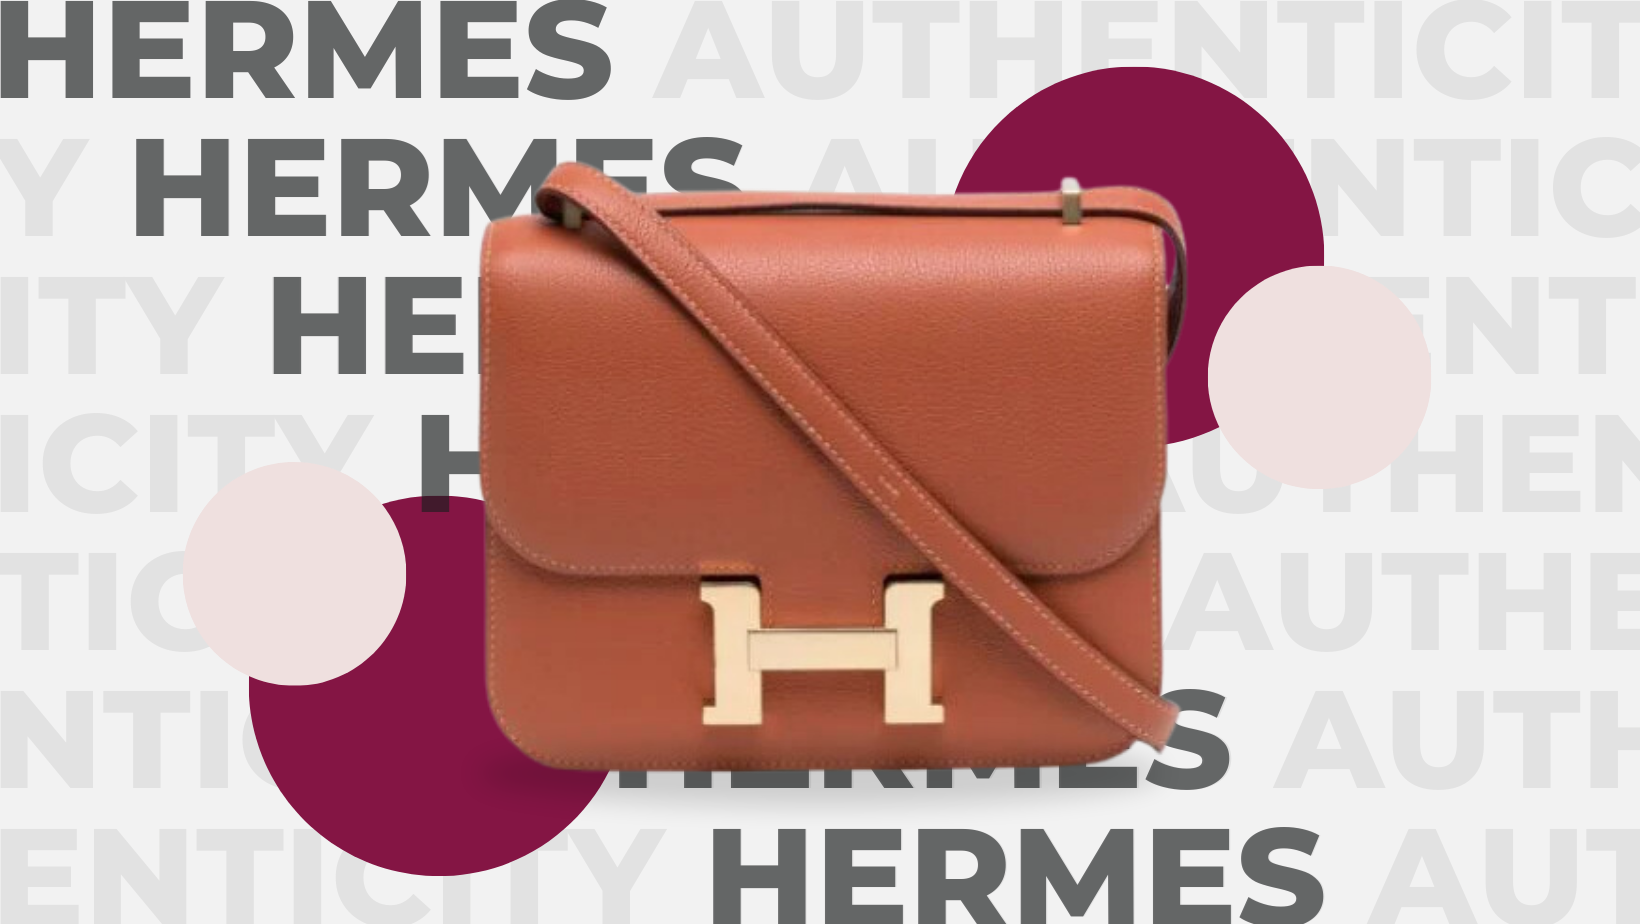 For newcomers to Hermes, do you know what types of Hermes leather